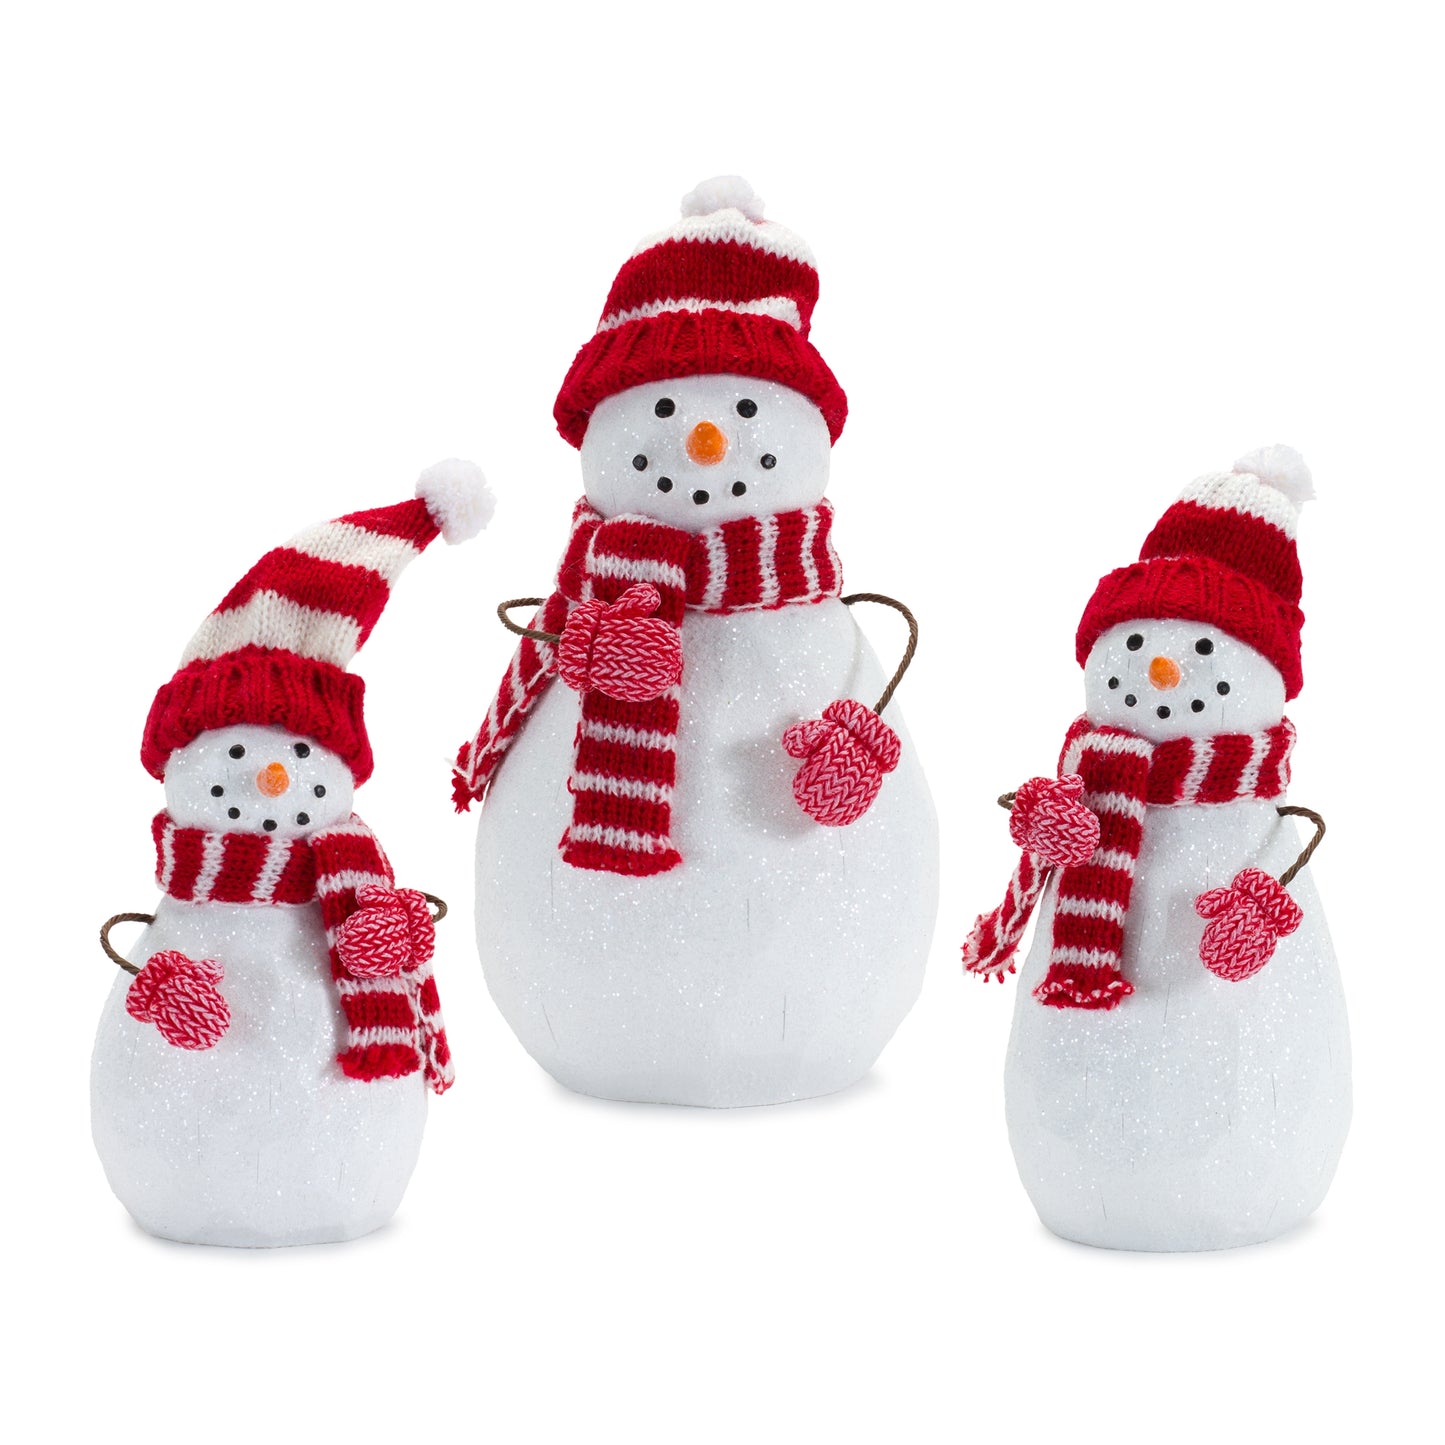 Whimsical Snowman Figurine with Hat and Mitten Accent (Set of 3)